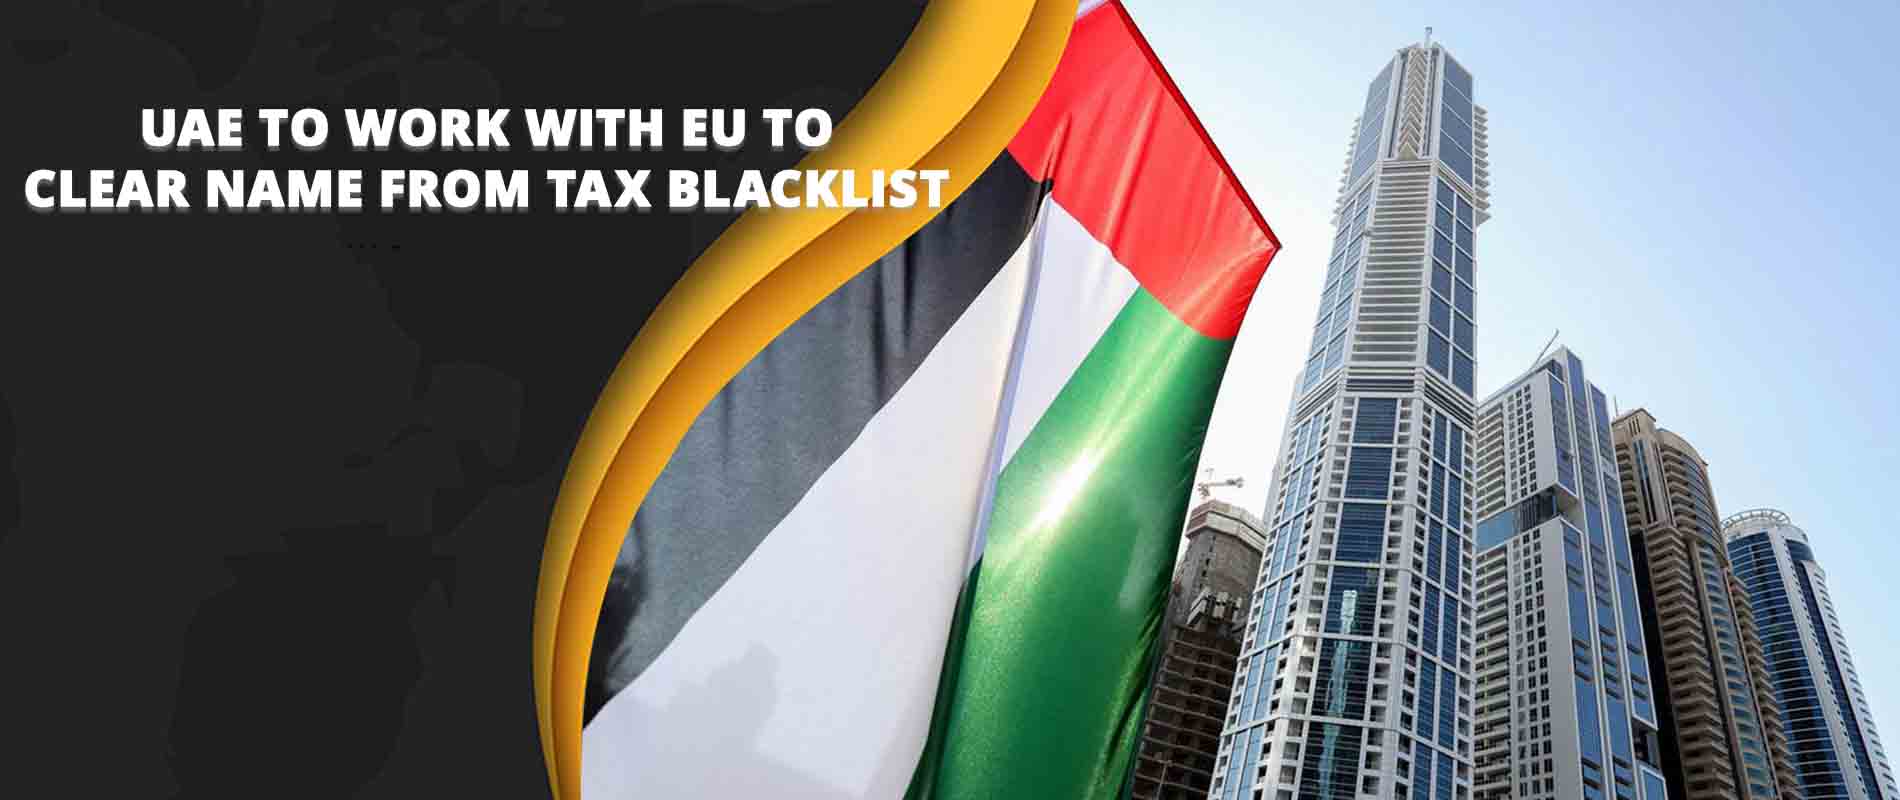 UAE to work with EU to clear name from tax blacklist